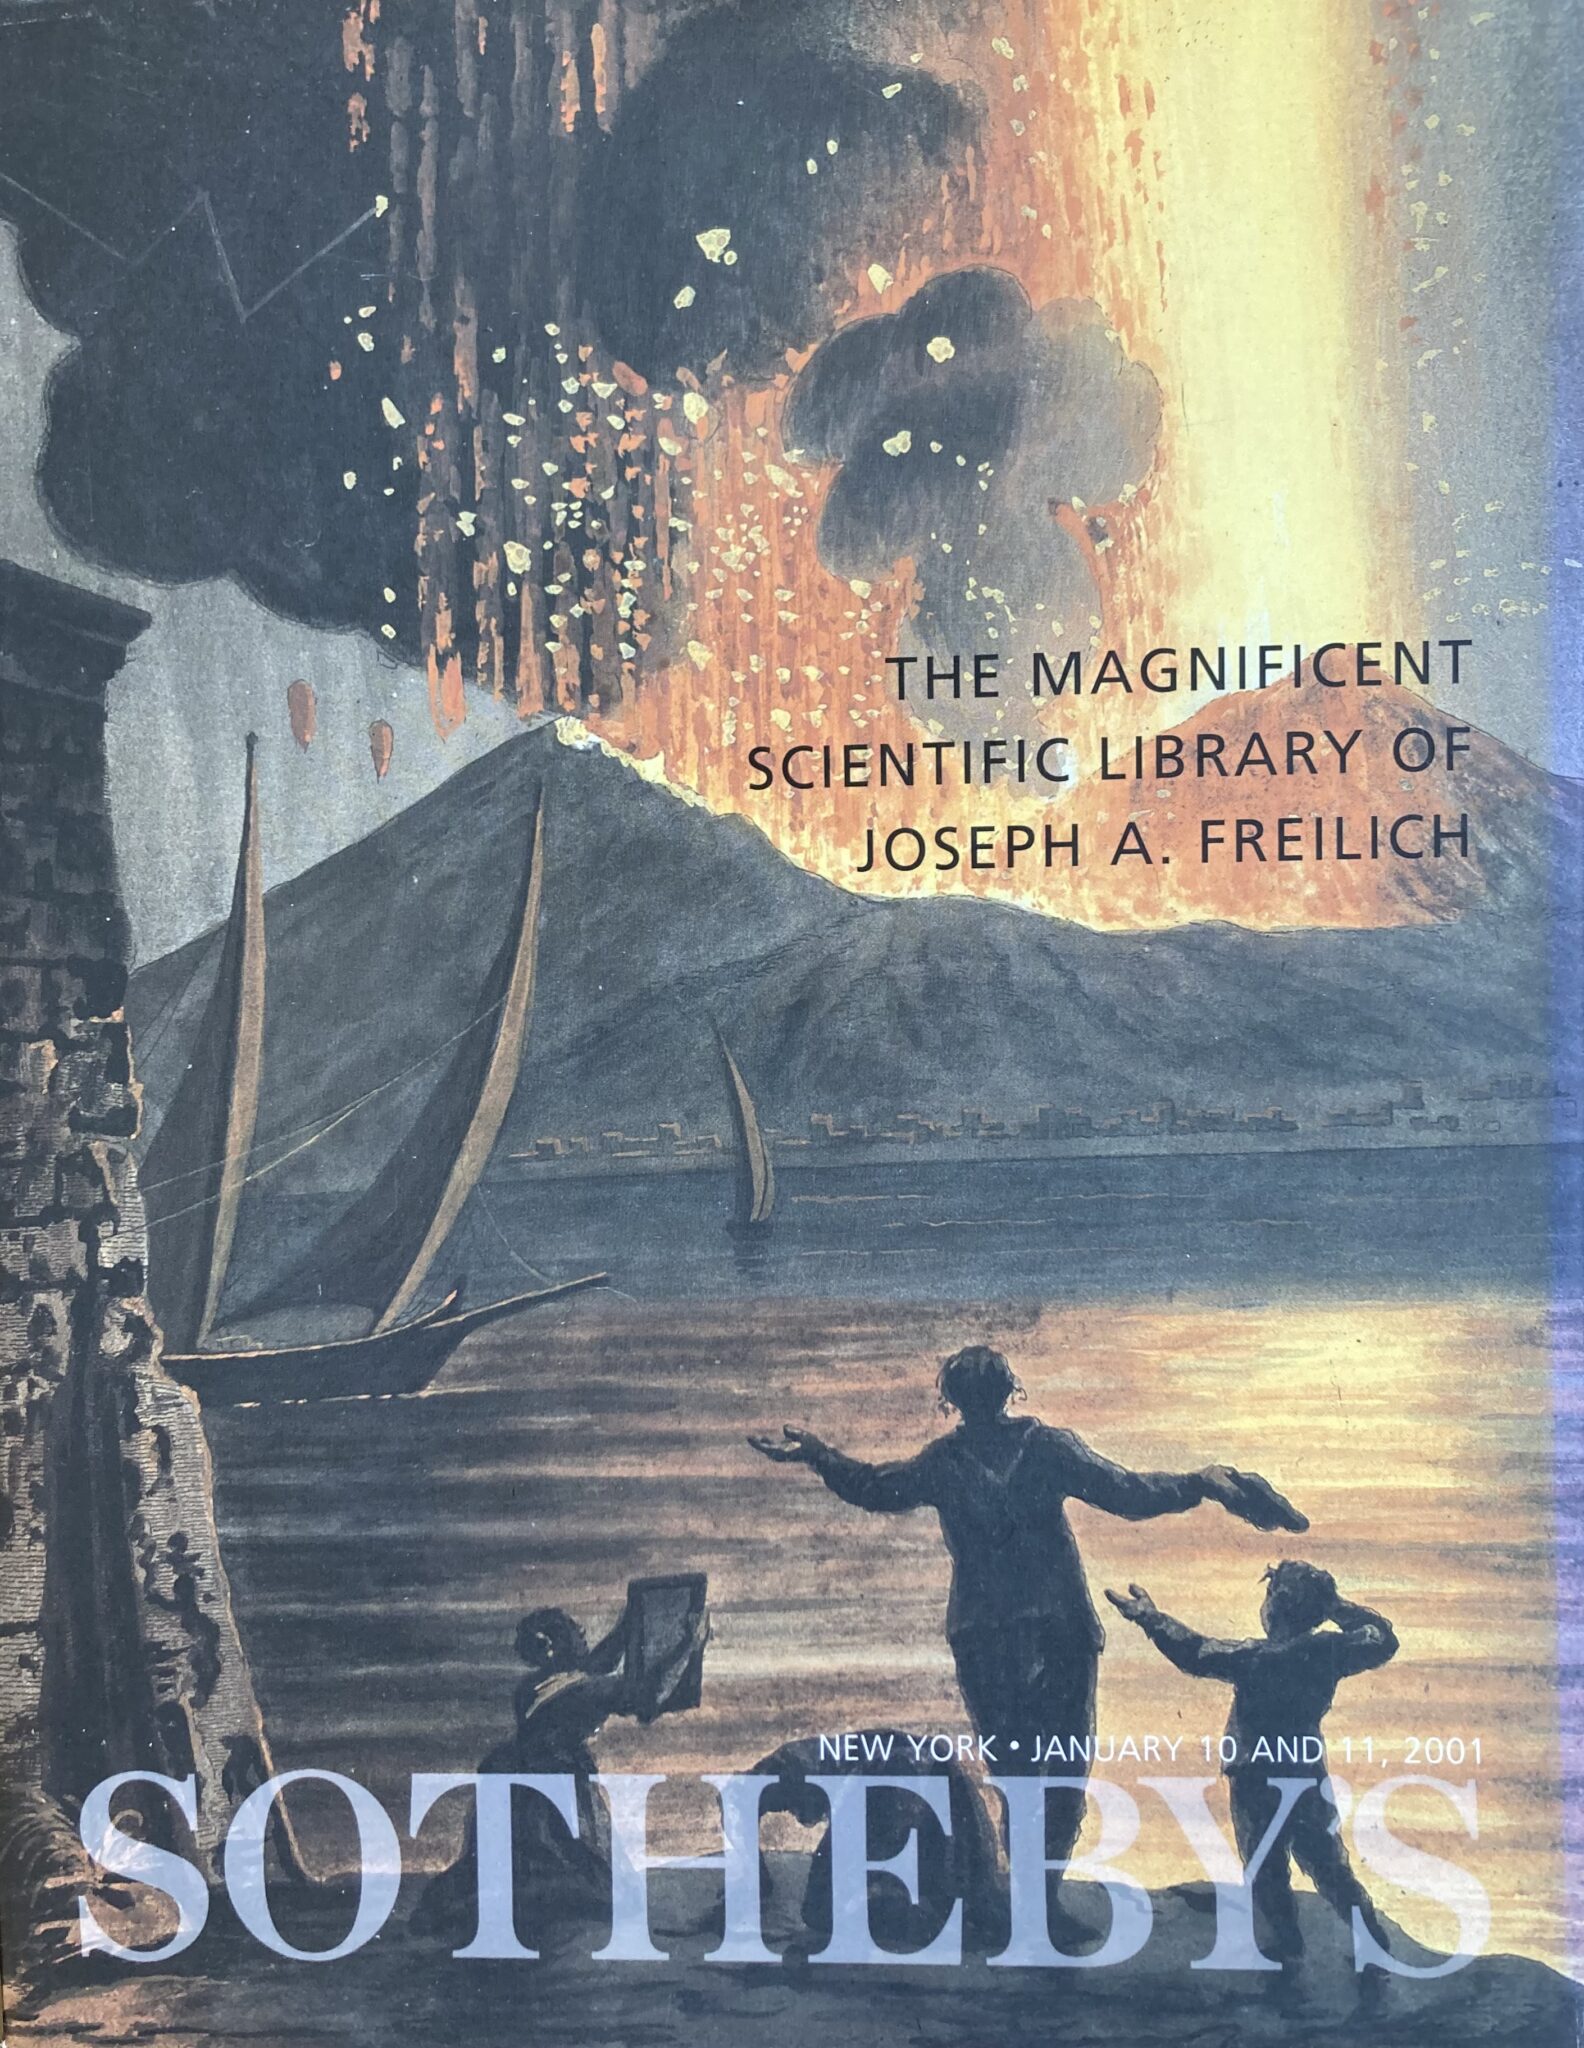 Sotheby’s Auction Catalogue, January 10 2001-The Magnificent Scientific Library of Joseph A Freilich (All book sales go to Medecins sans Frontiere charity)